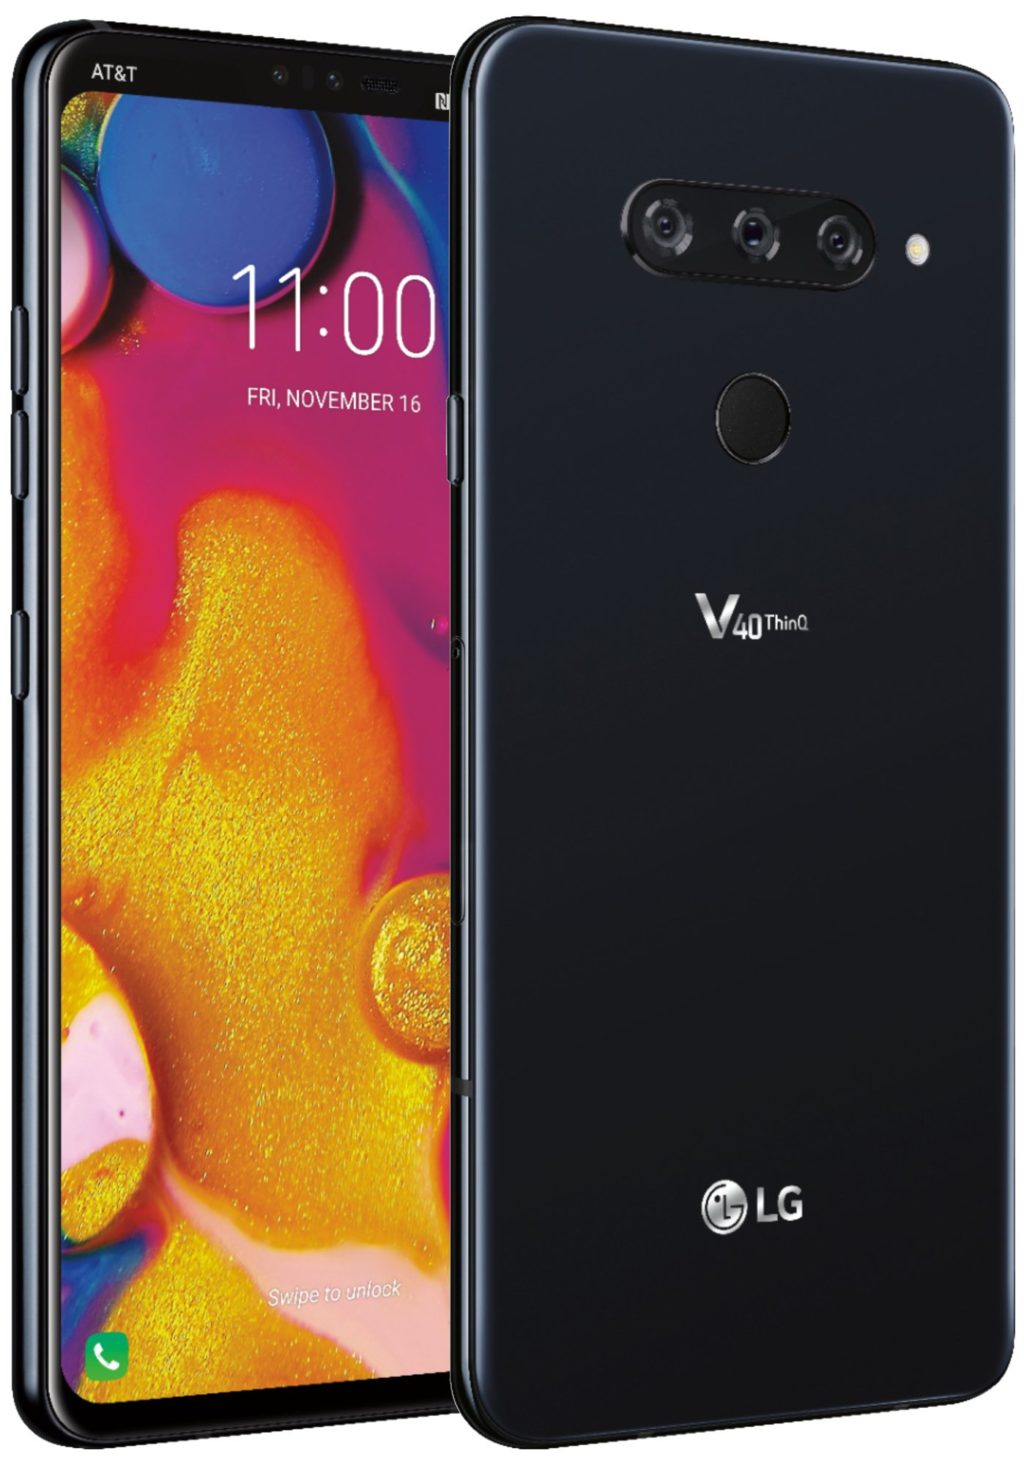 LG V40 ThinQ for AT&T leaks out